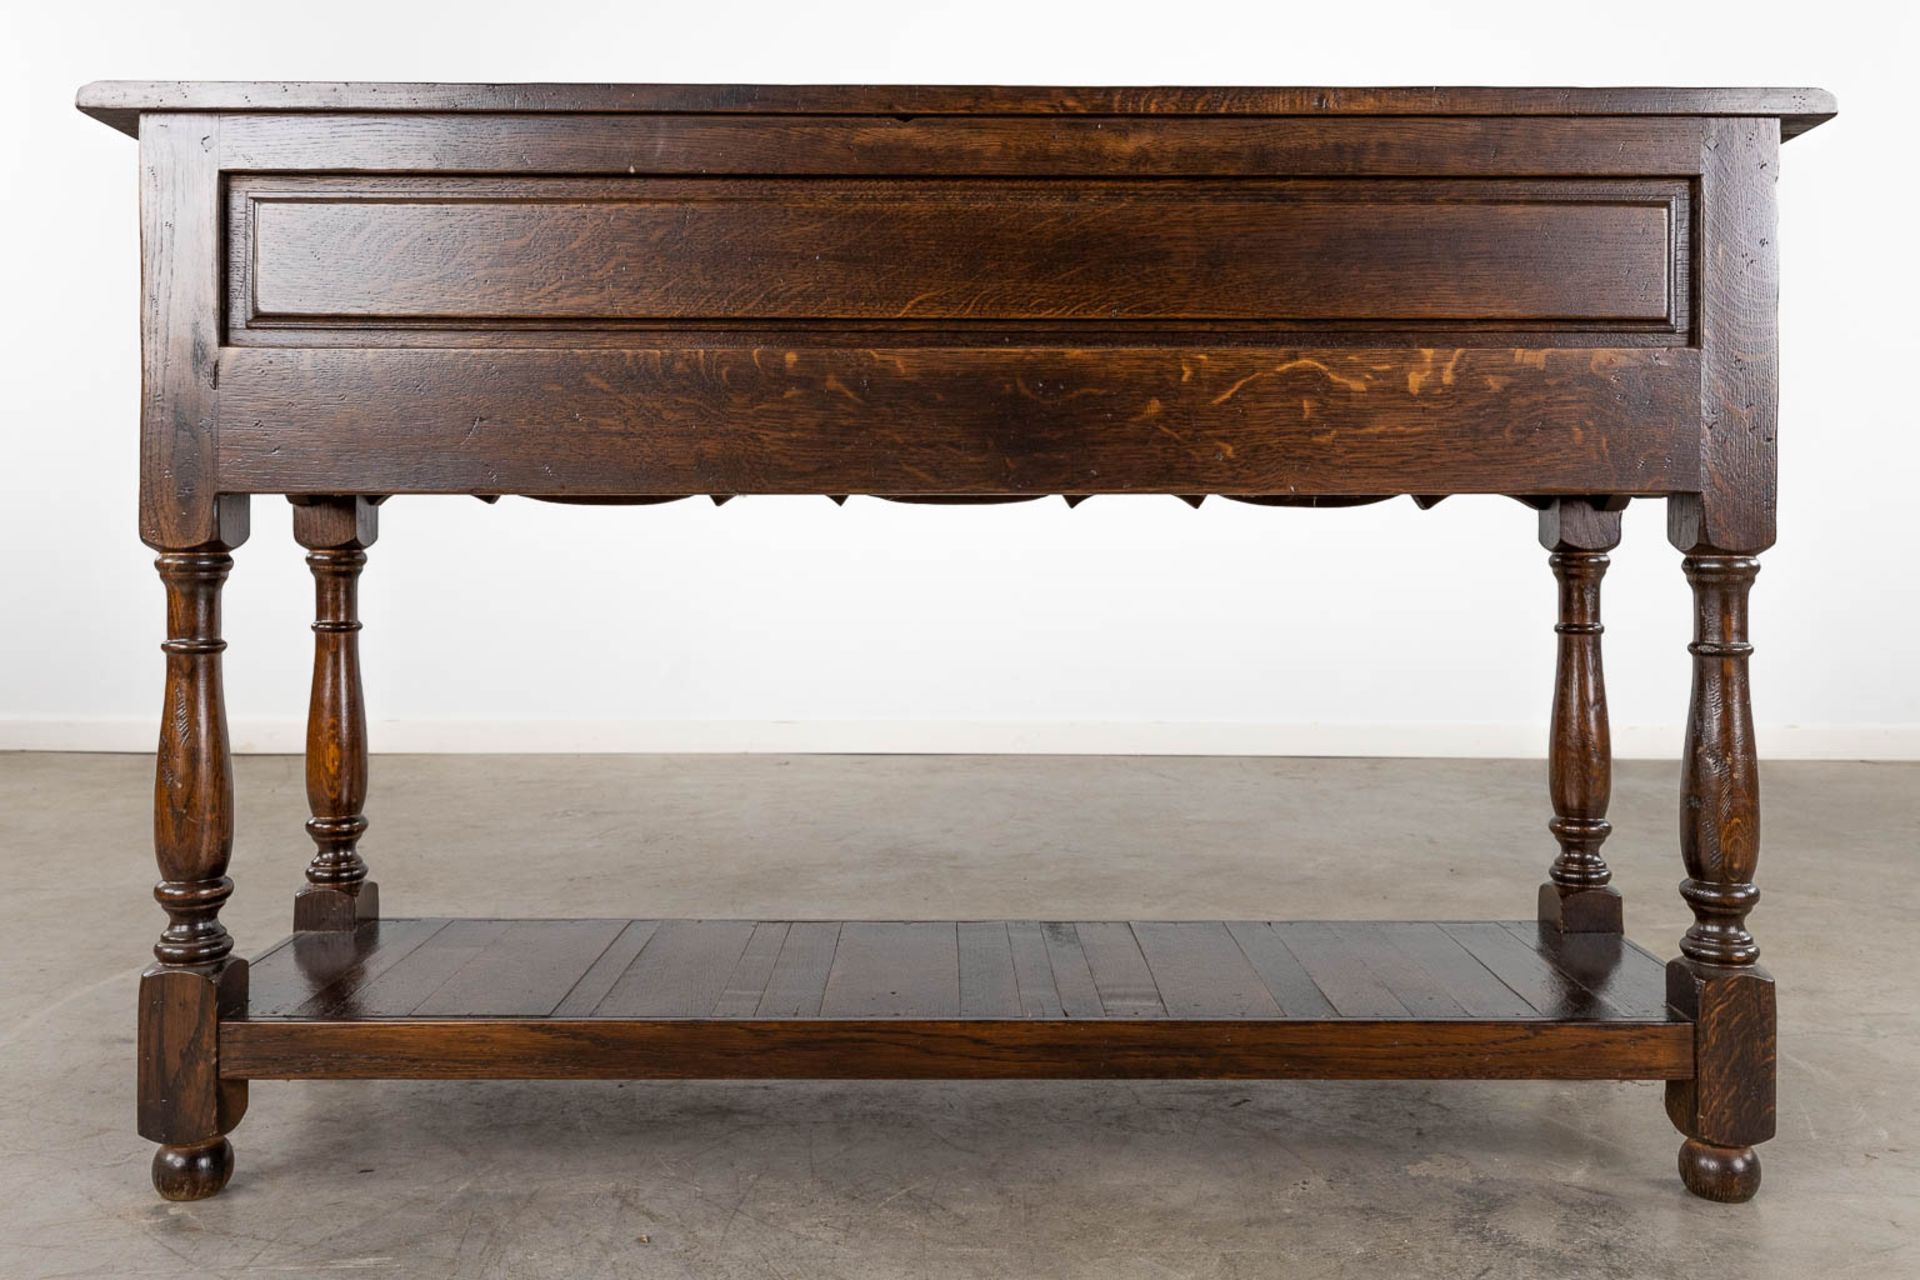 An English console table with 3 drawers. 20th C. (D:35 x W:120 x H:77 cm) - Image 6 of 8